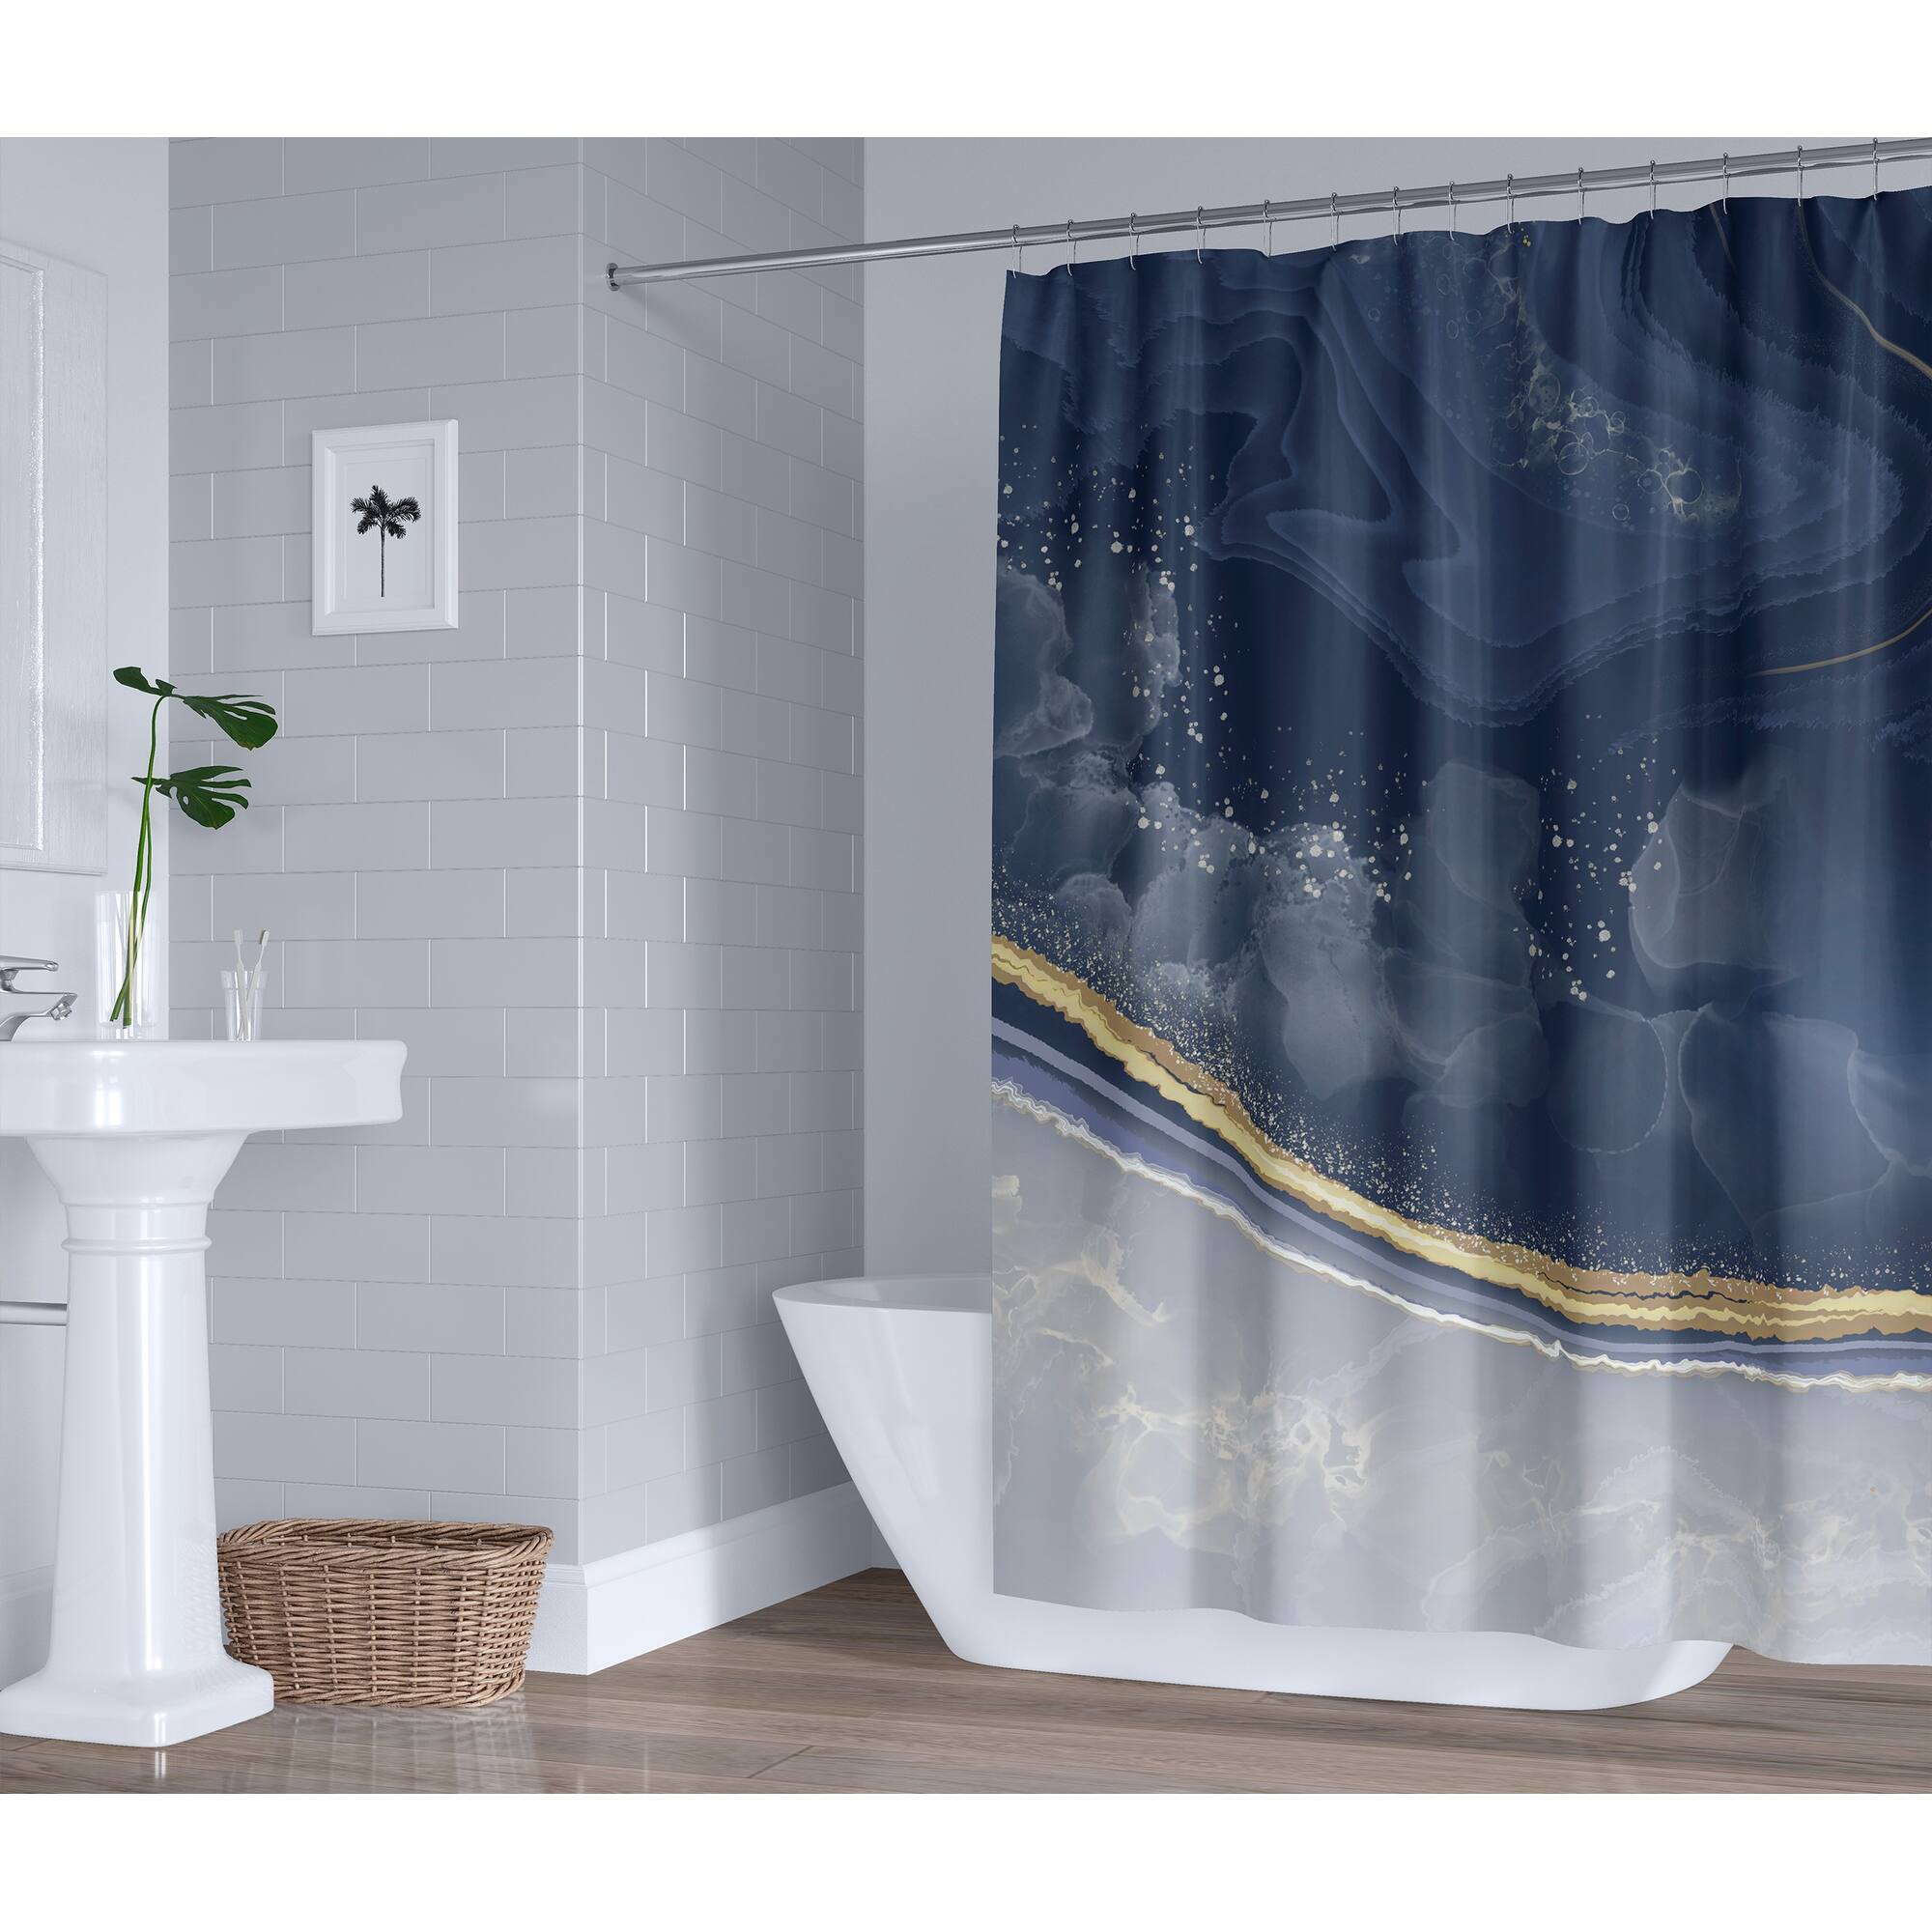 SILICA NAVY Shower Curtain By Kavka Designs